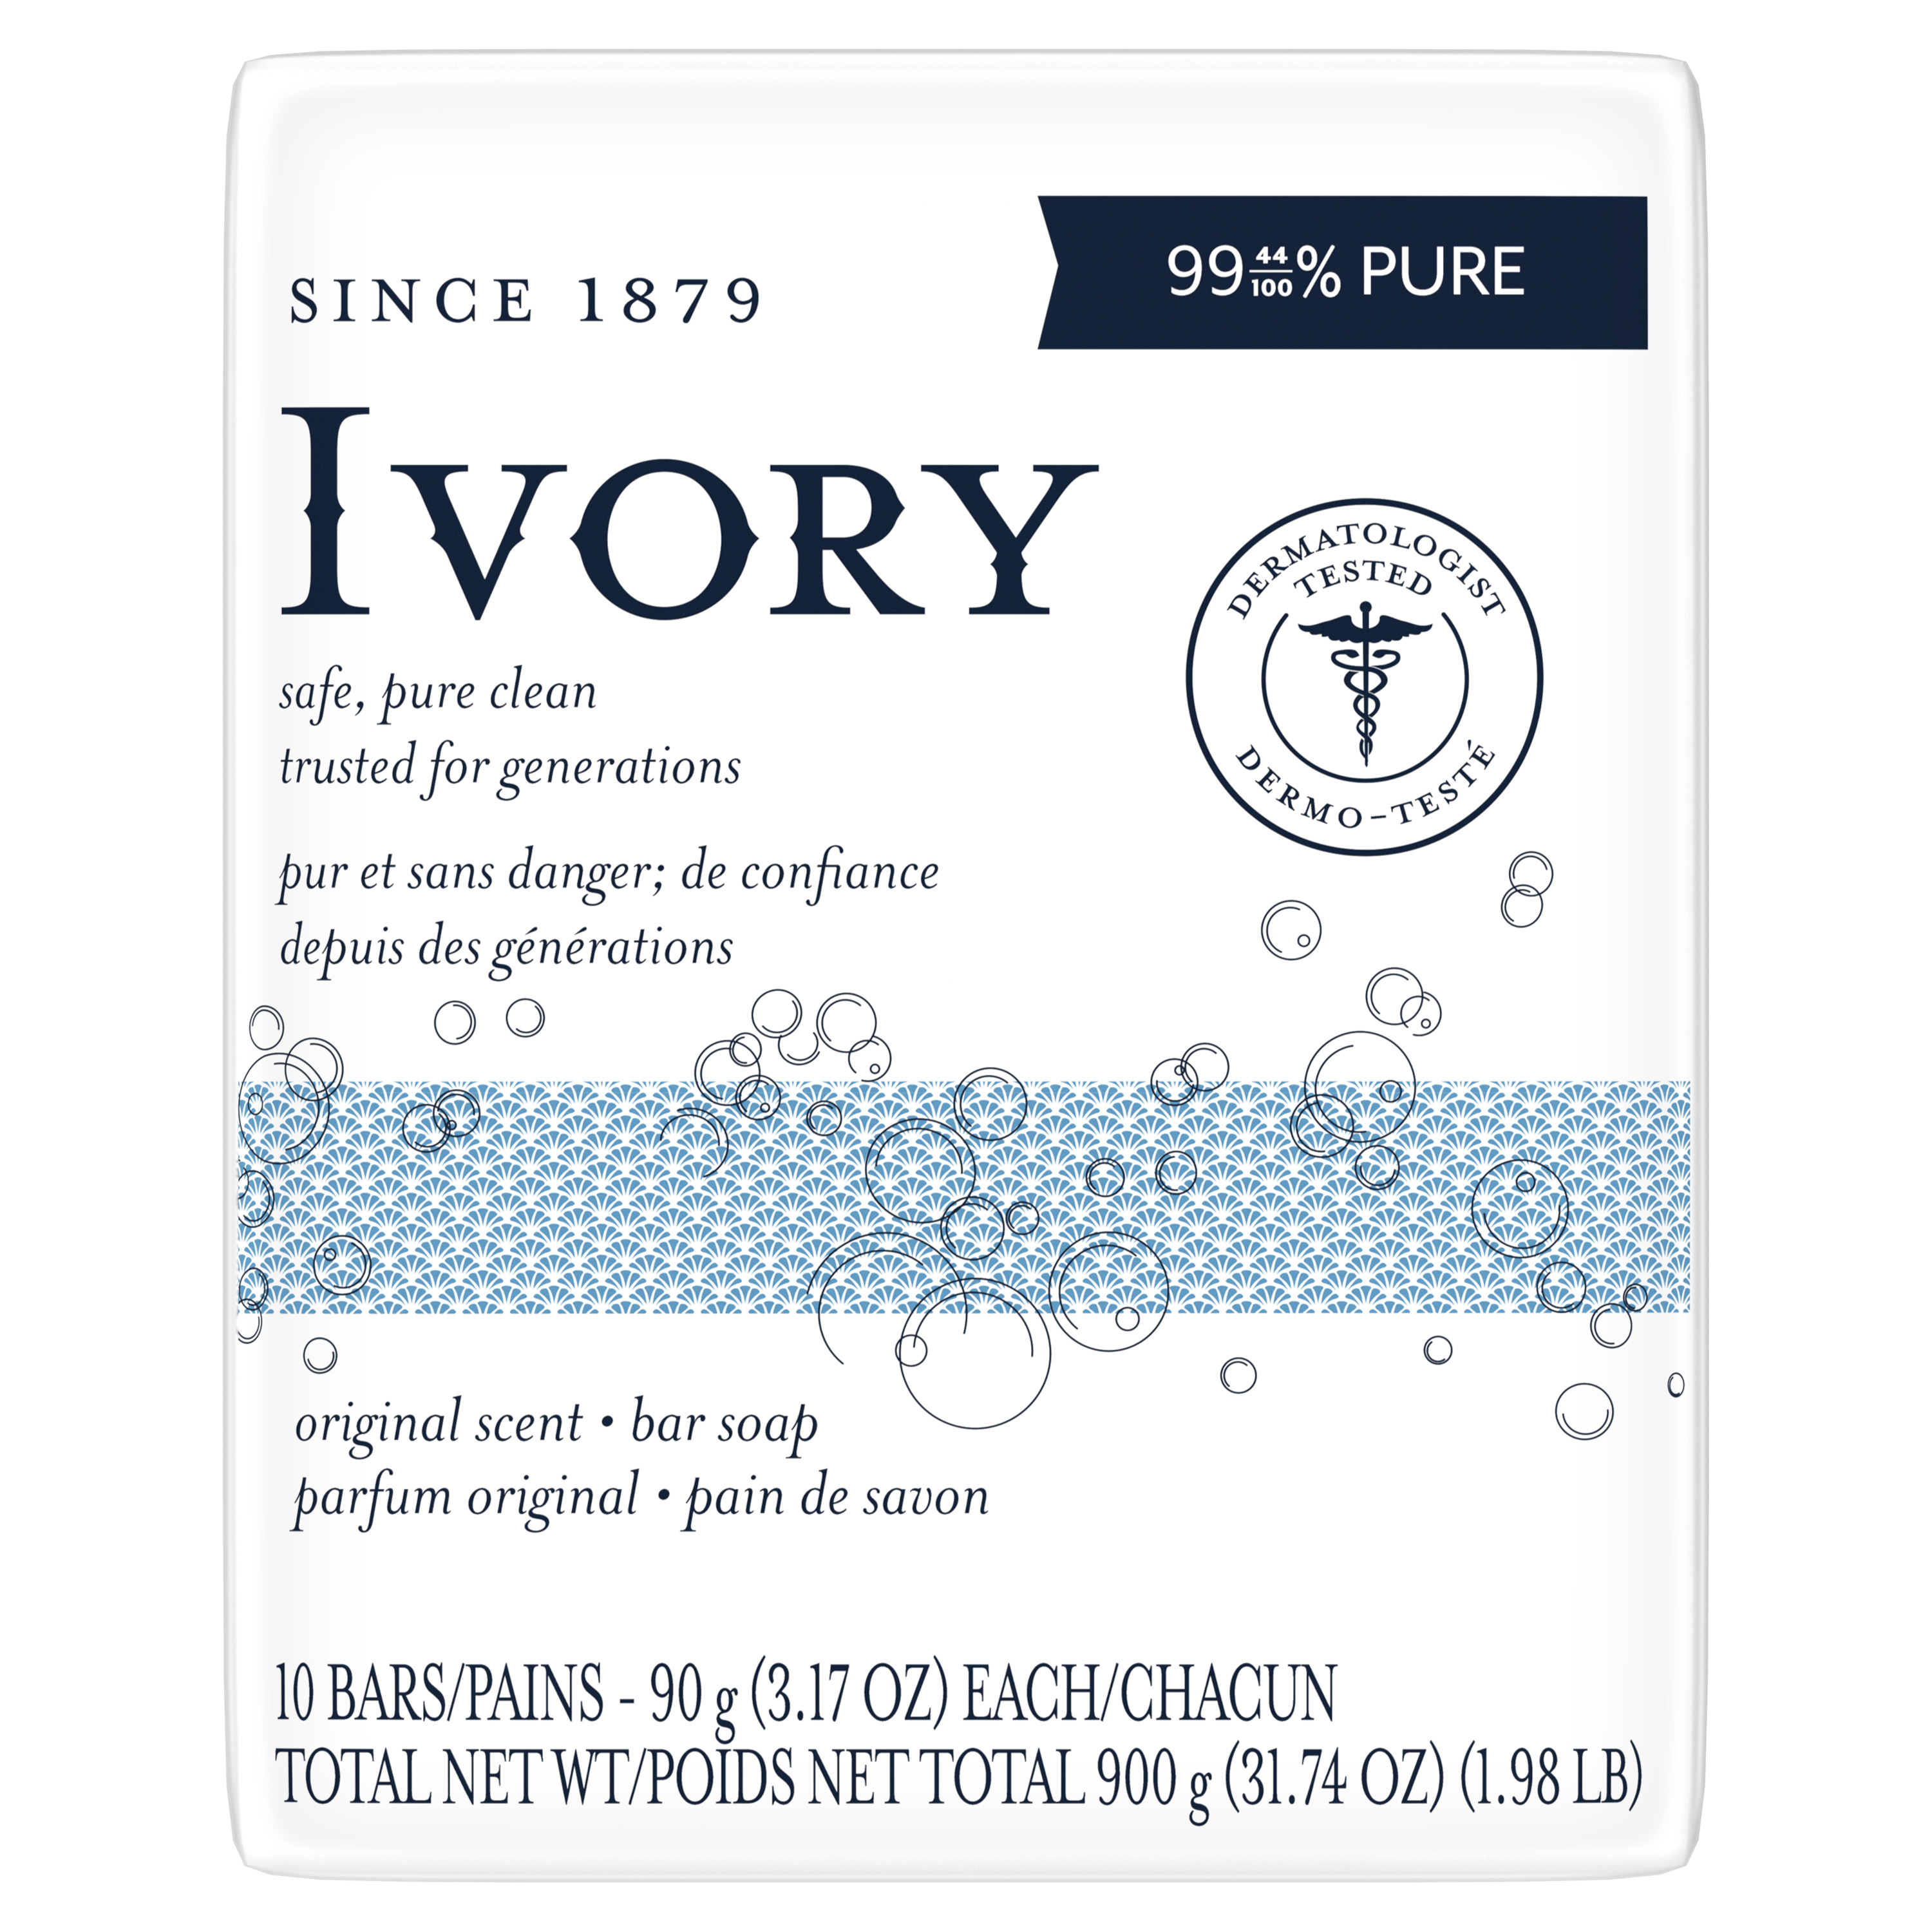 Ivory Bar Soap with Original Scent, 3.17 oz, 10 Count - image 1 of 8